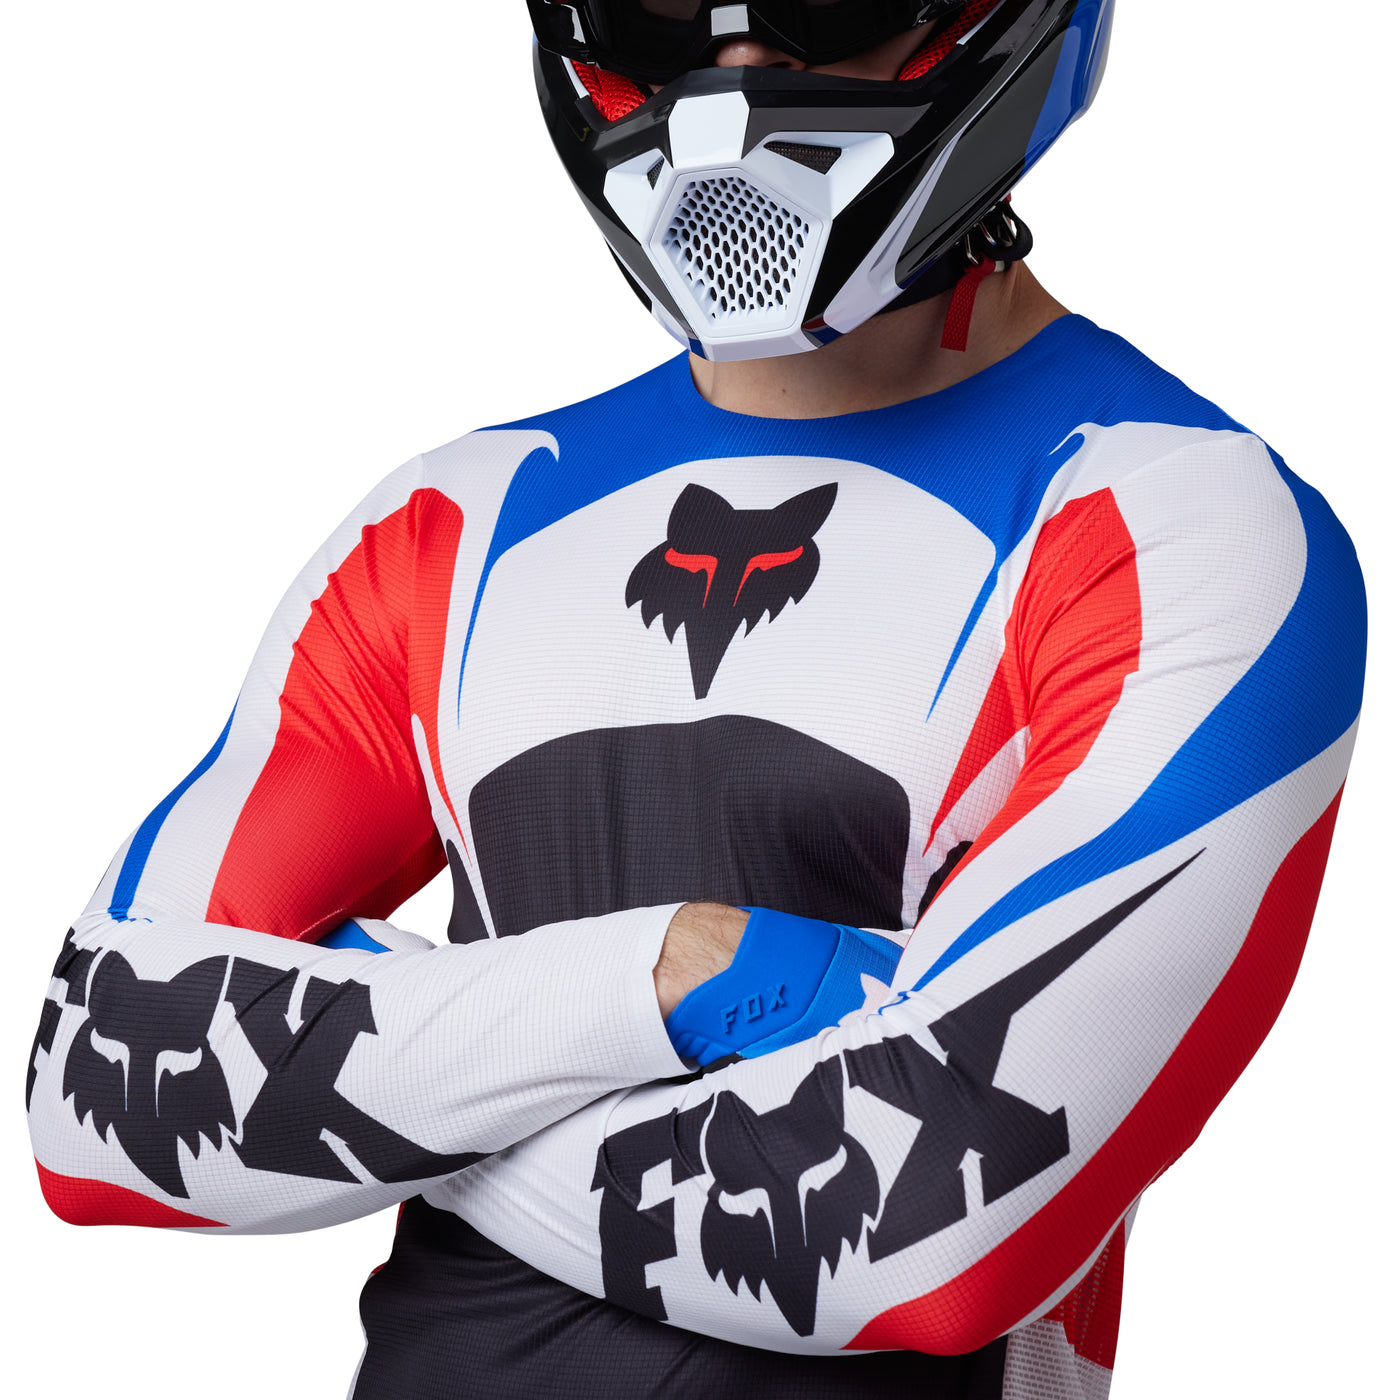 Fox Limited Edition Unity Red White Blue Gear